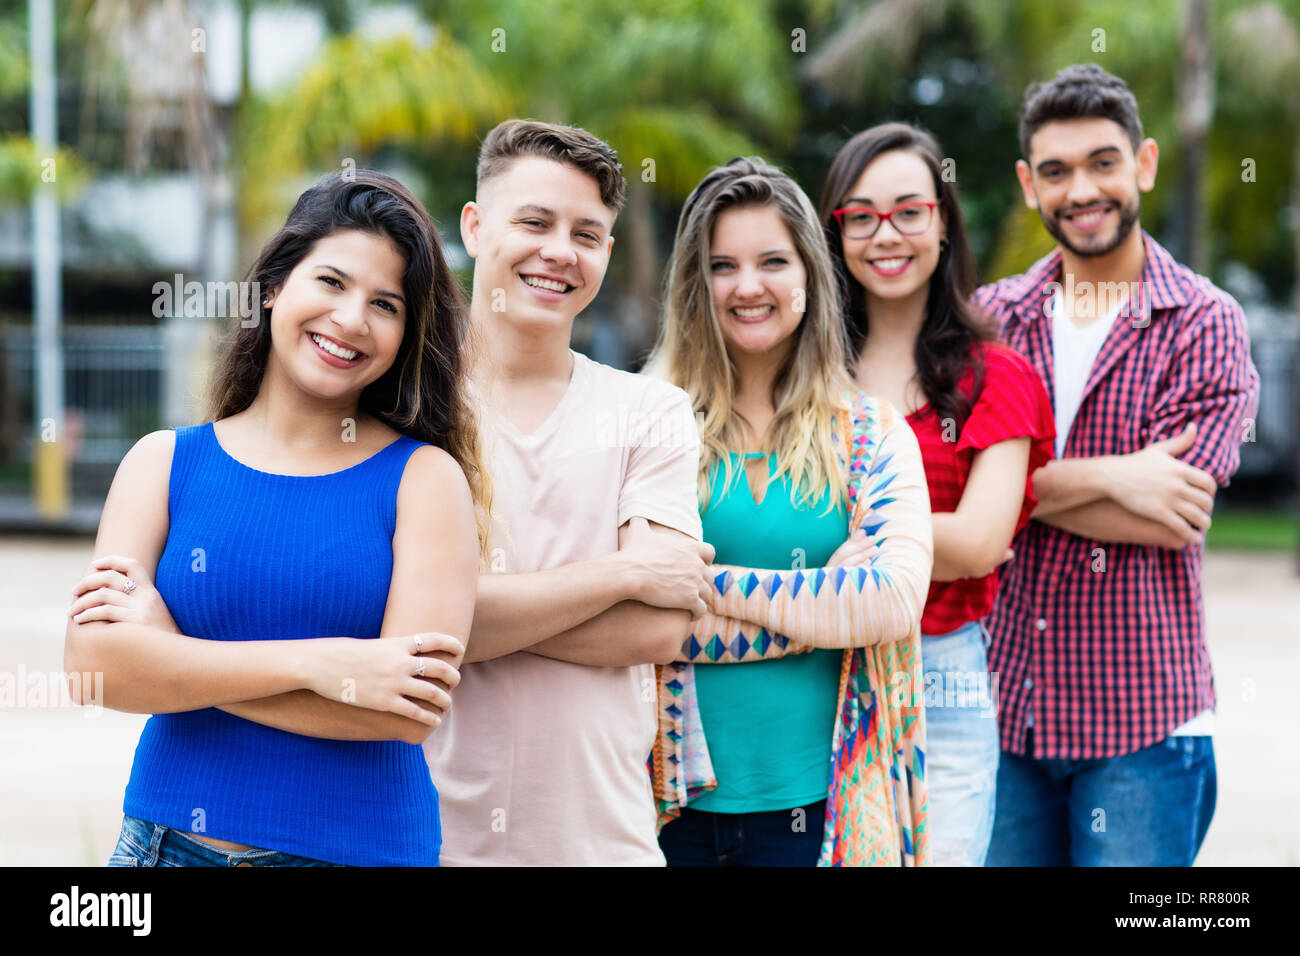 Spanish girl with male and female young adults in line outdoor in the city Stock Photo